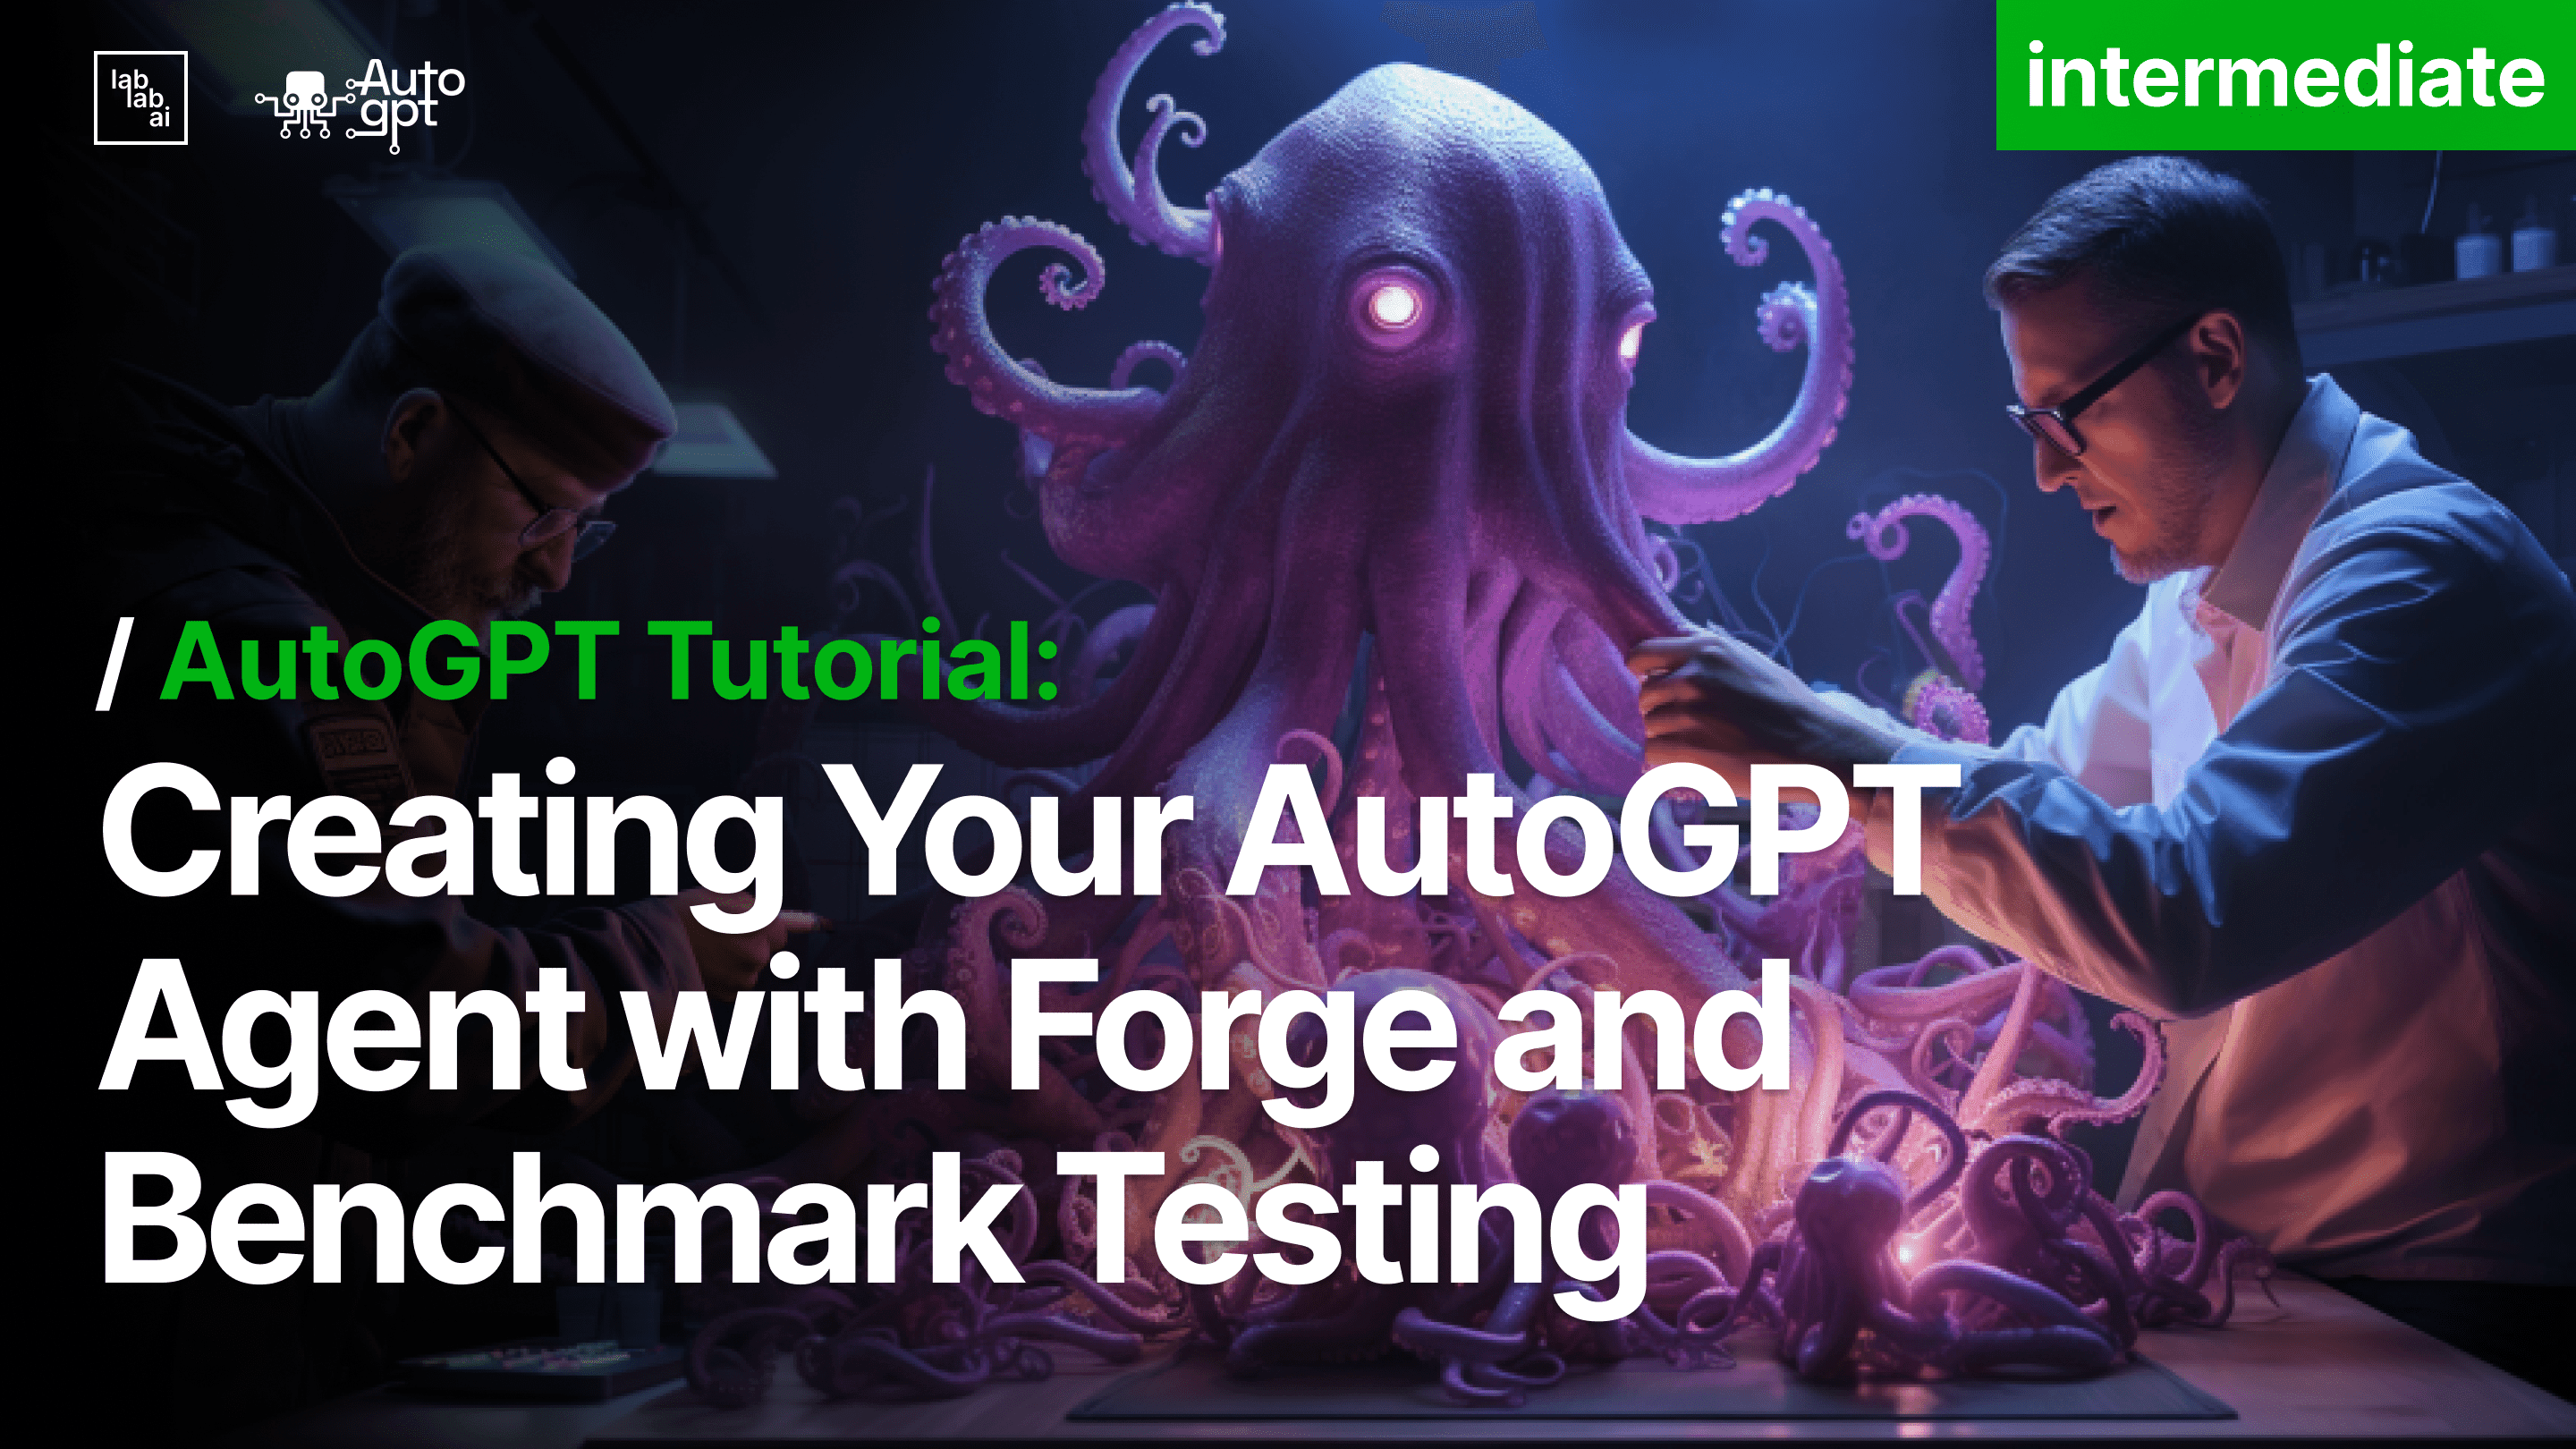 How to build your own AutoGPT agent with Forge and test it with Benchmark